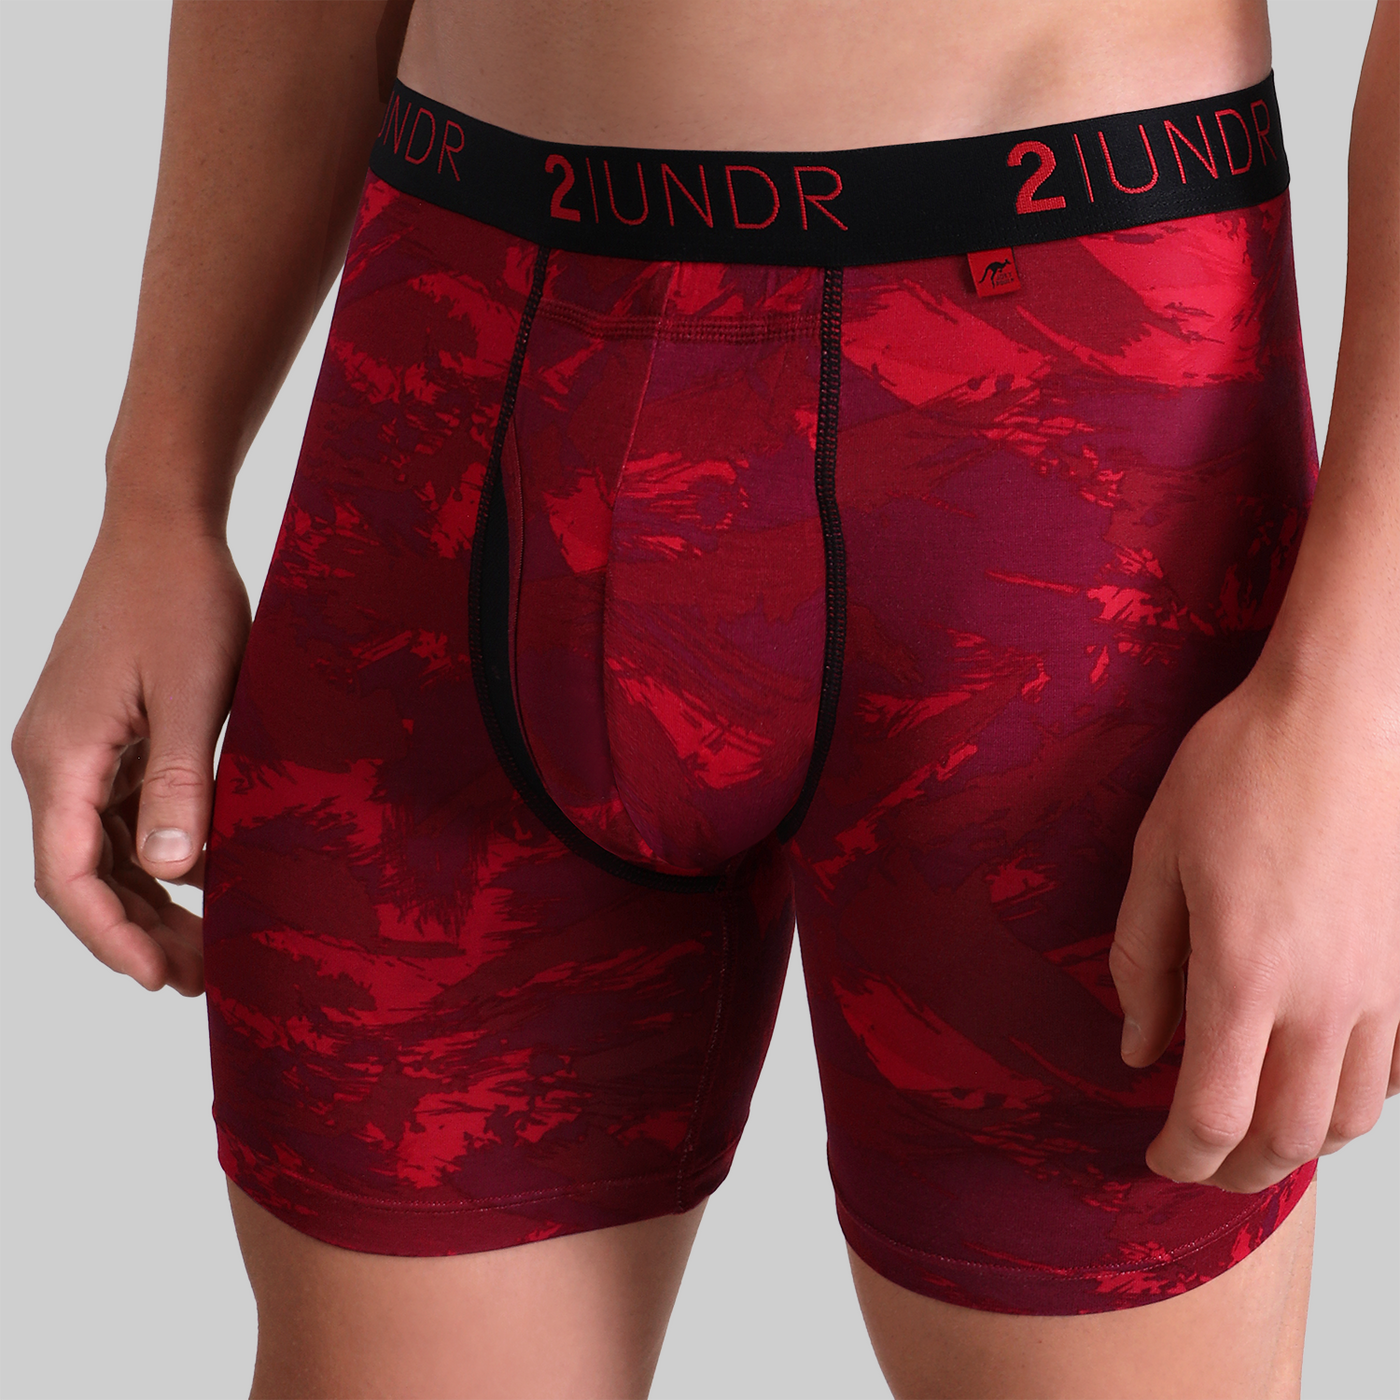 Swing Shift Boxer Brief - Red Storm